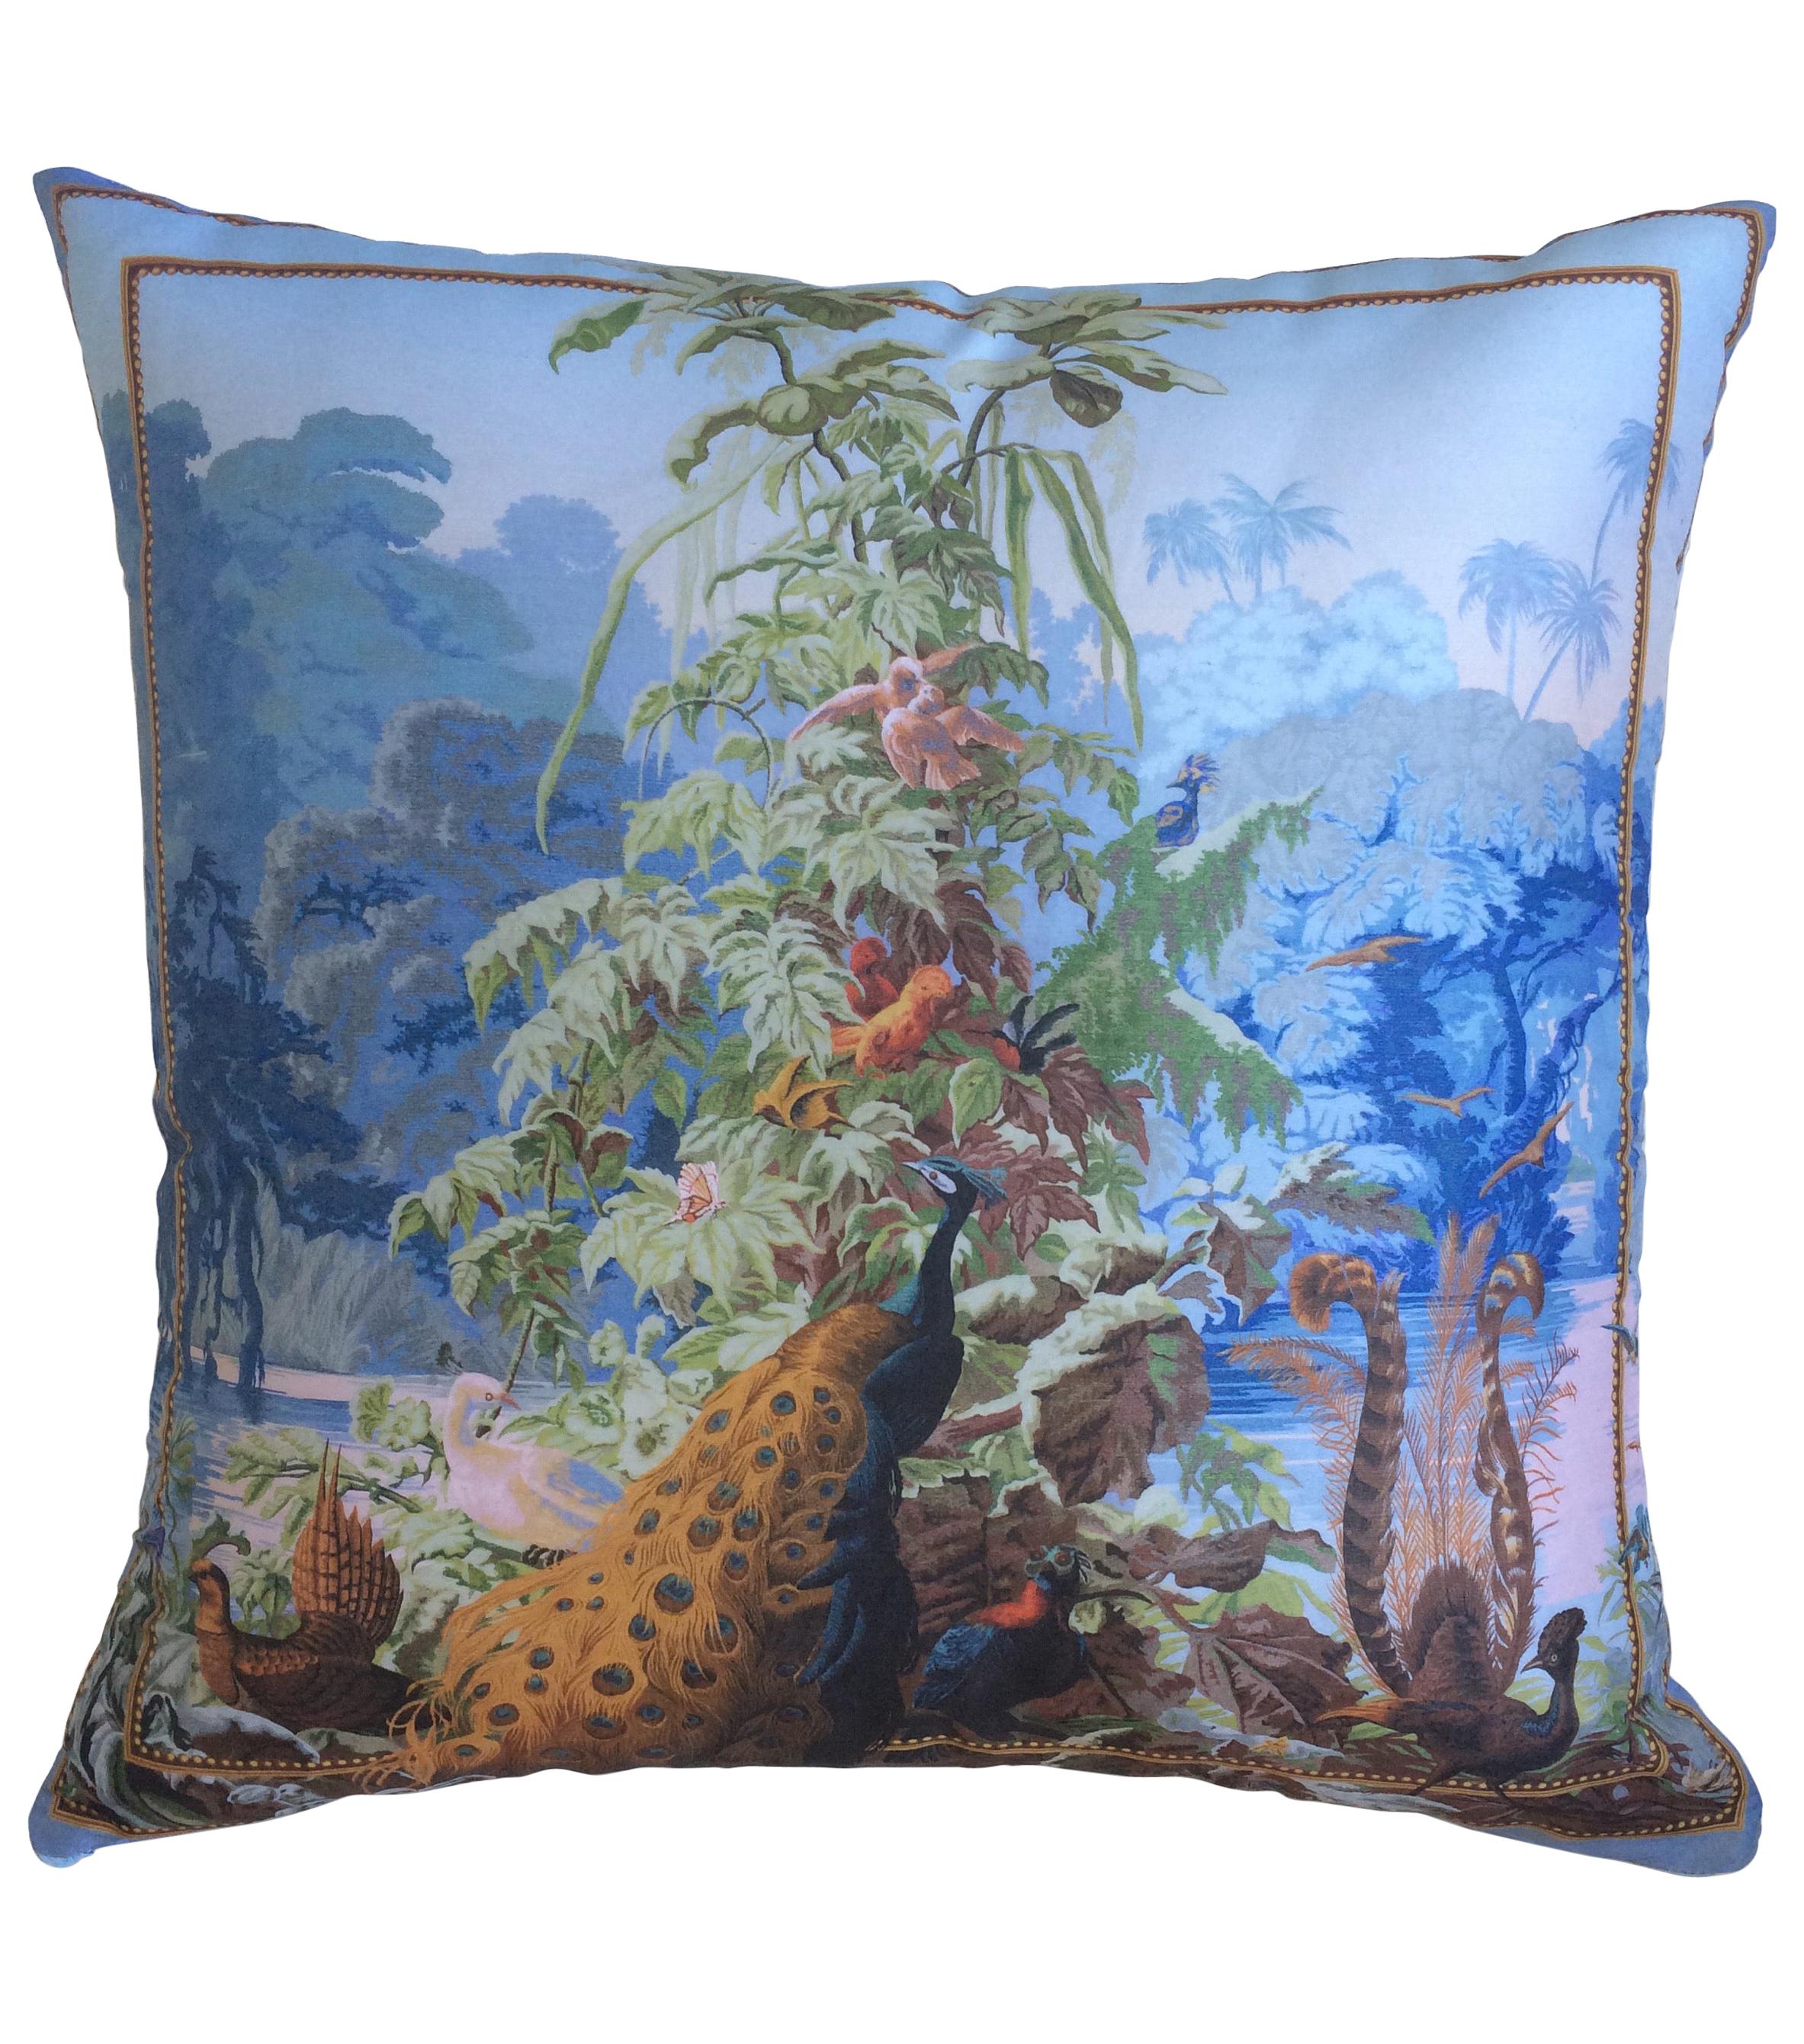 "Le Bresil" Peacock Silk Throw Pillow in Blue by Zuber For Sale